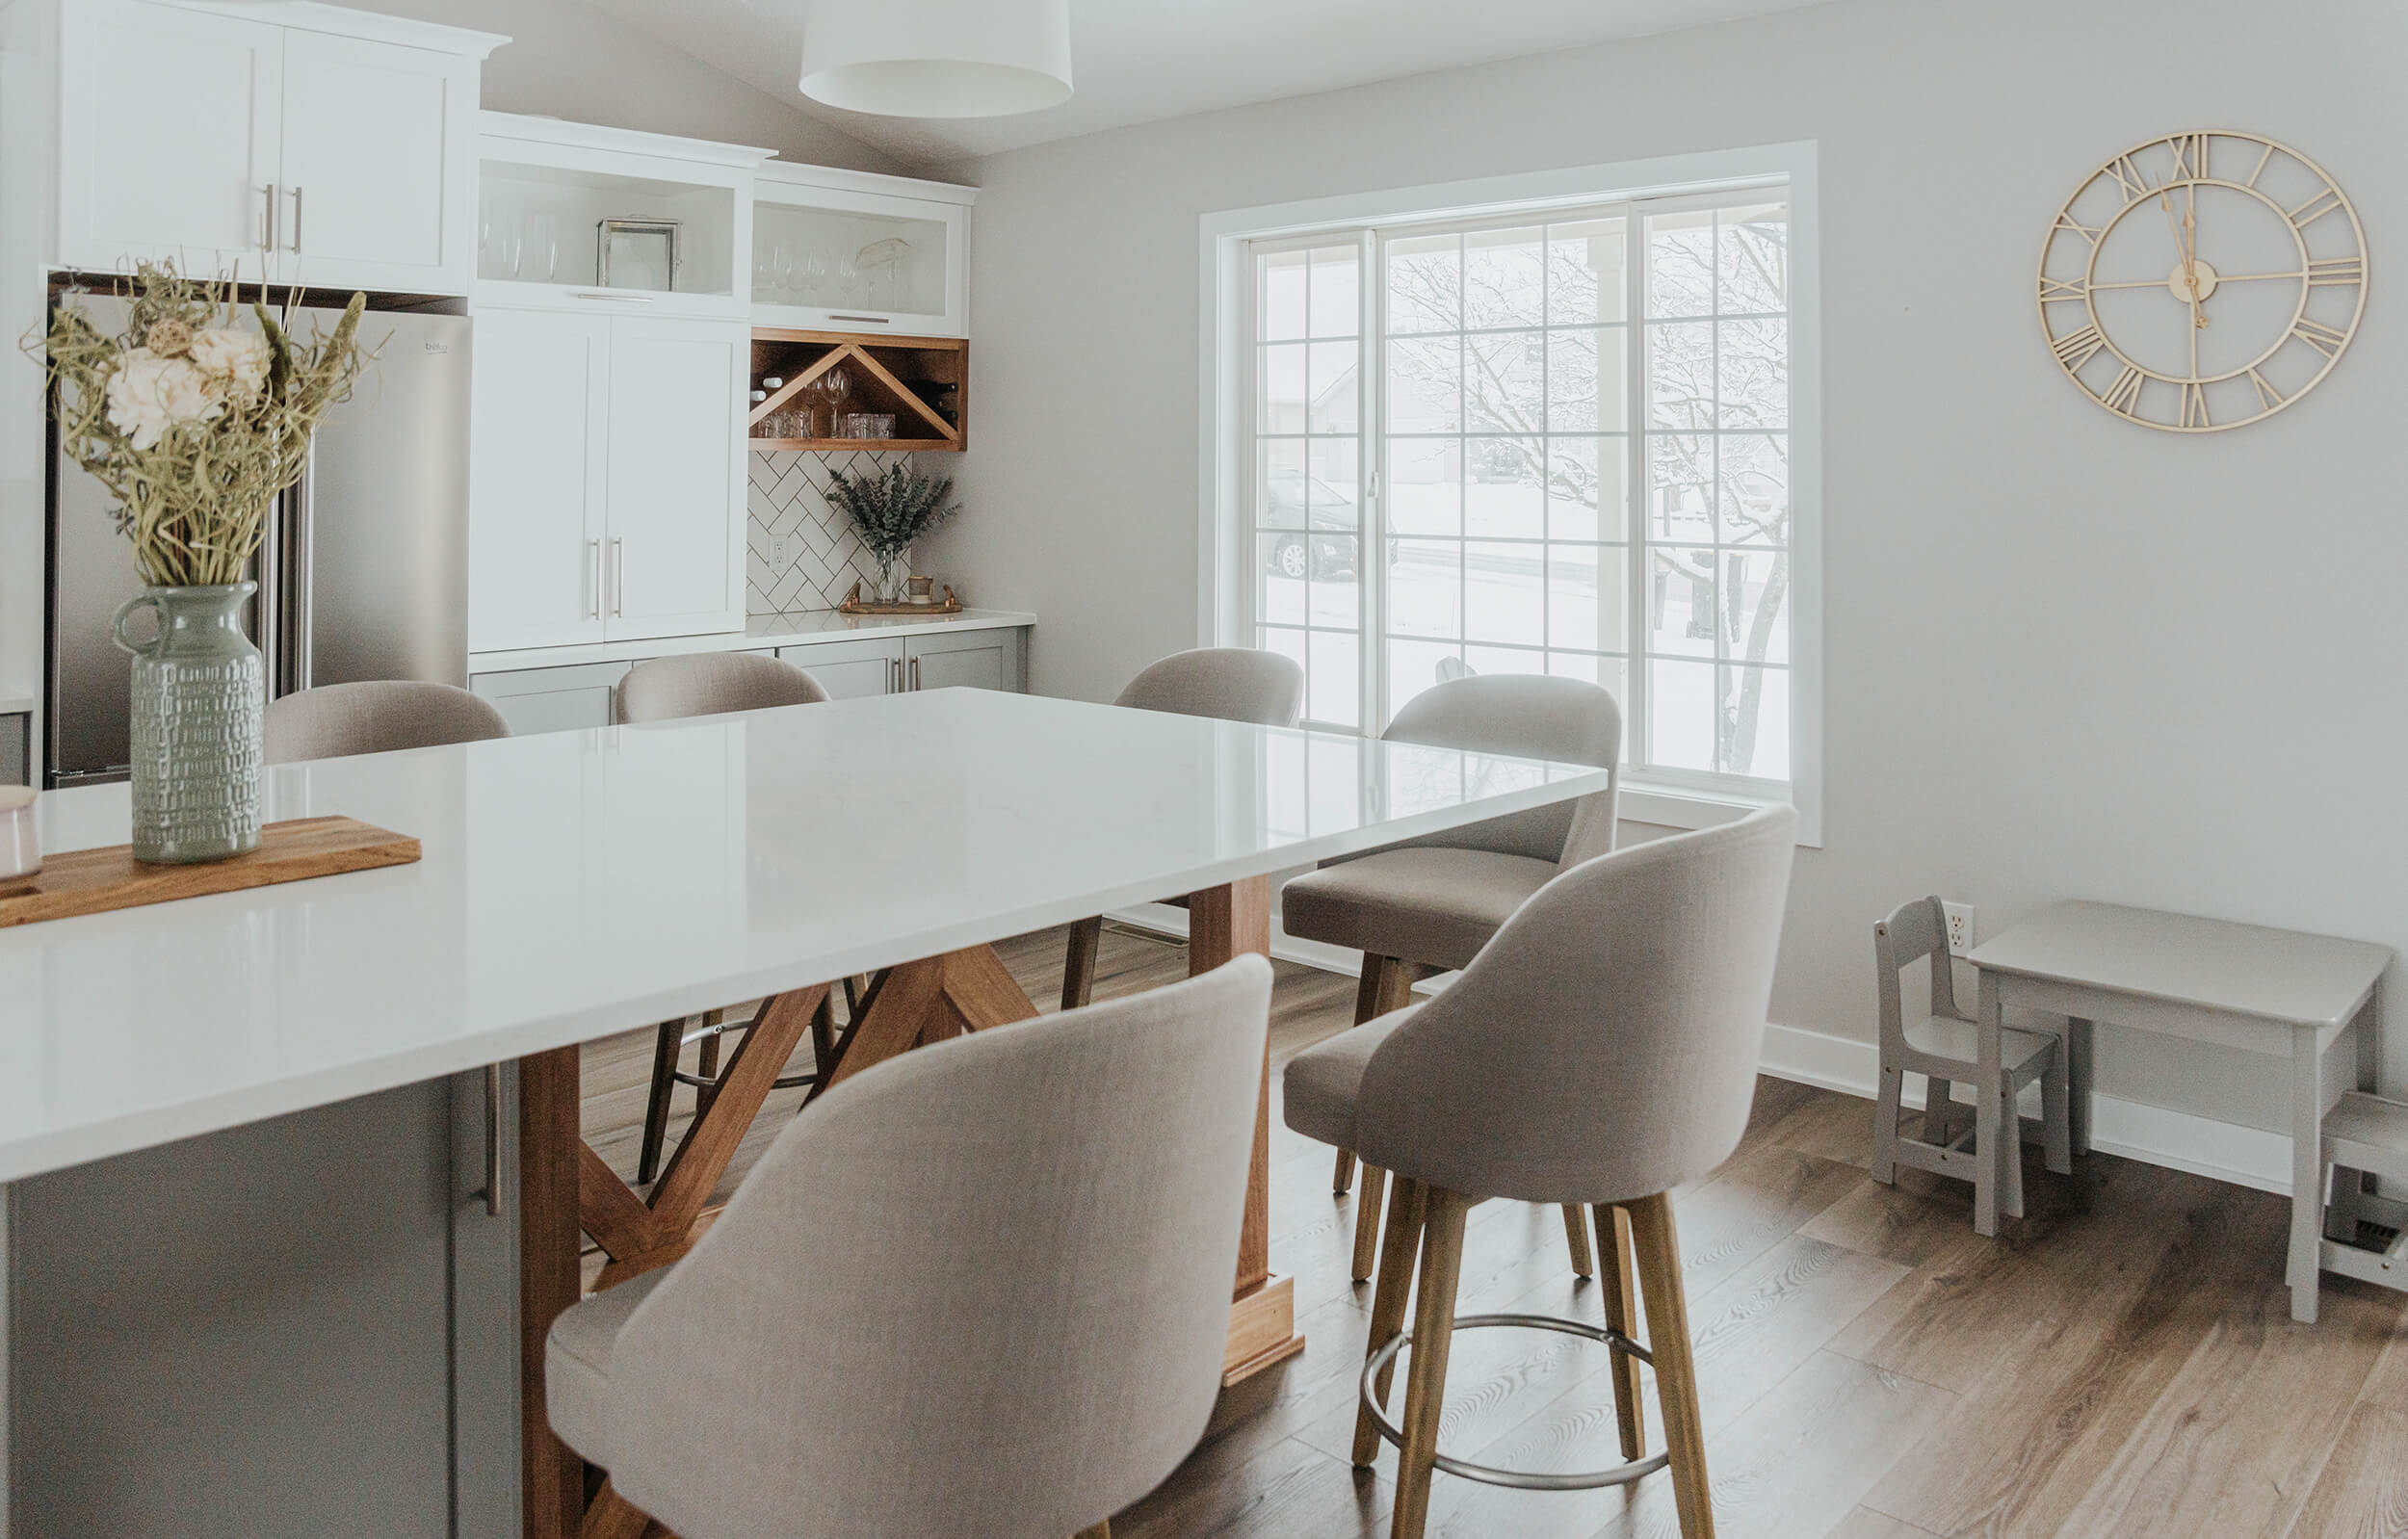 A two-toned Scandinavian style kitchen design with white and light gray painted cabinets accented with light wood finishes for the X-wine rack and X-Endcap on the the kitchen island.